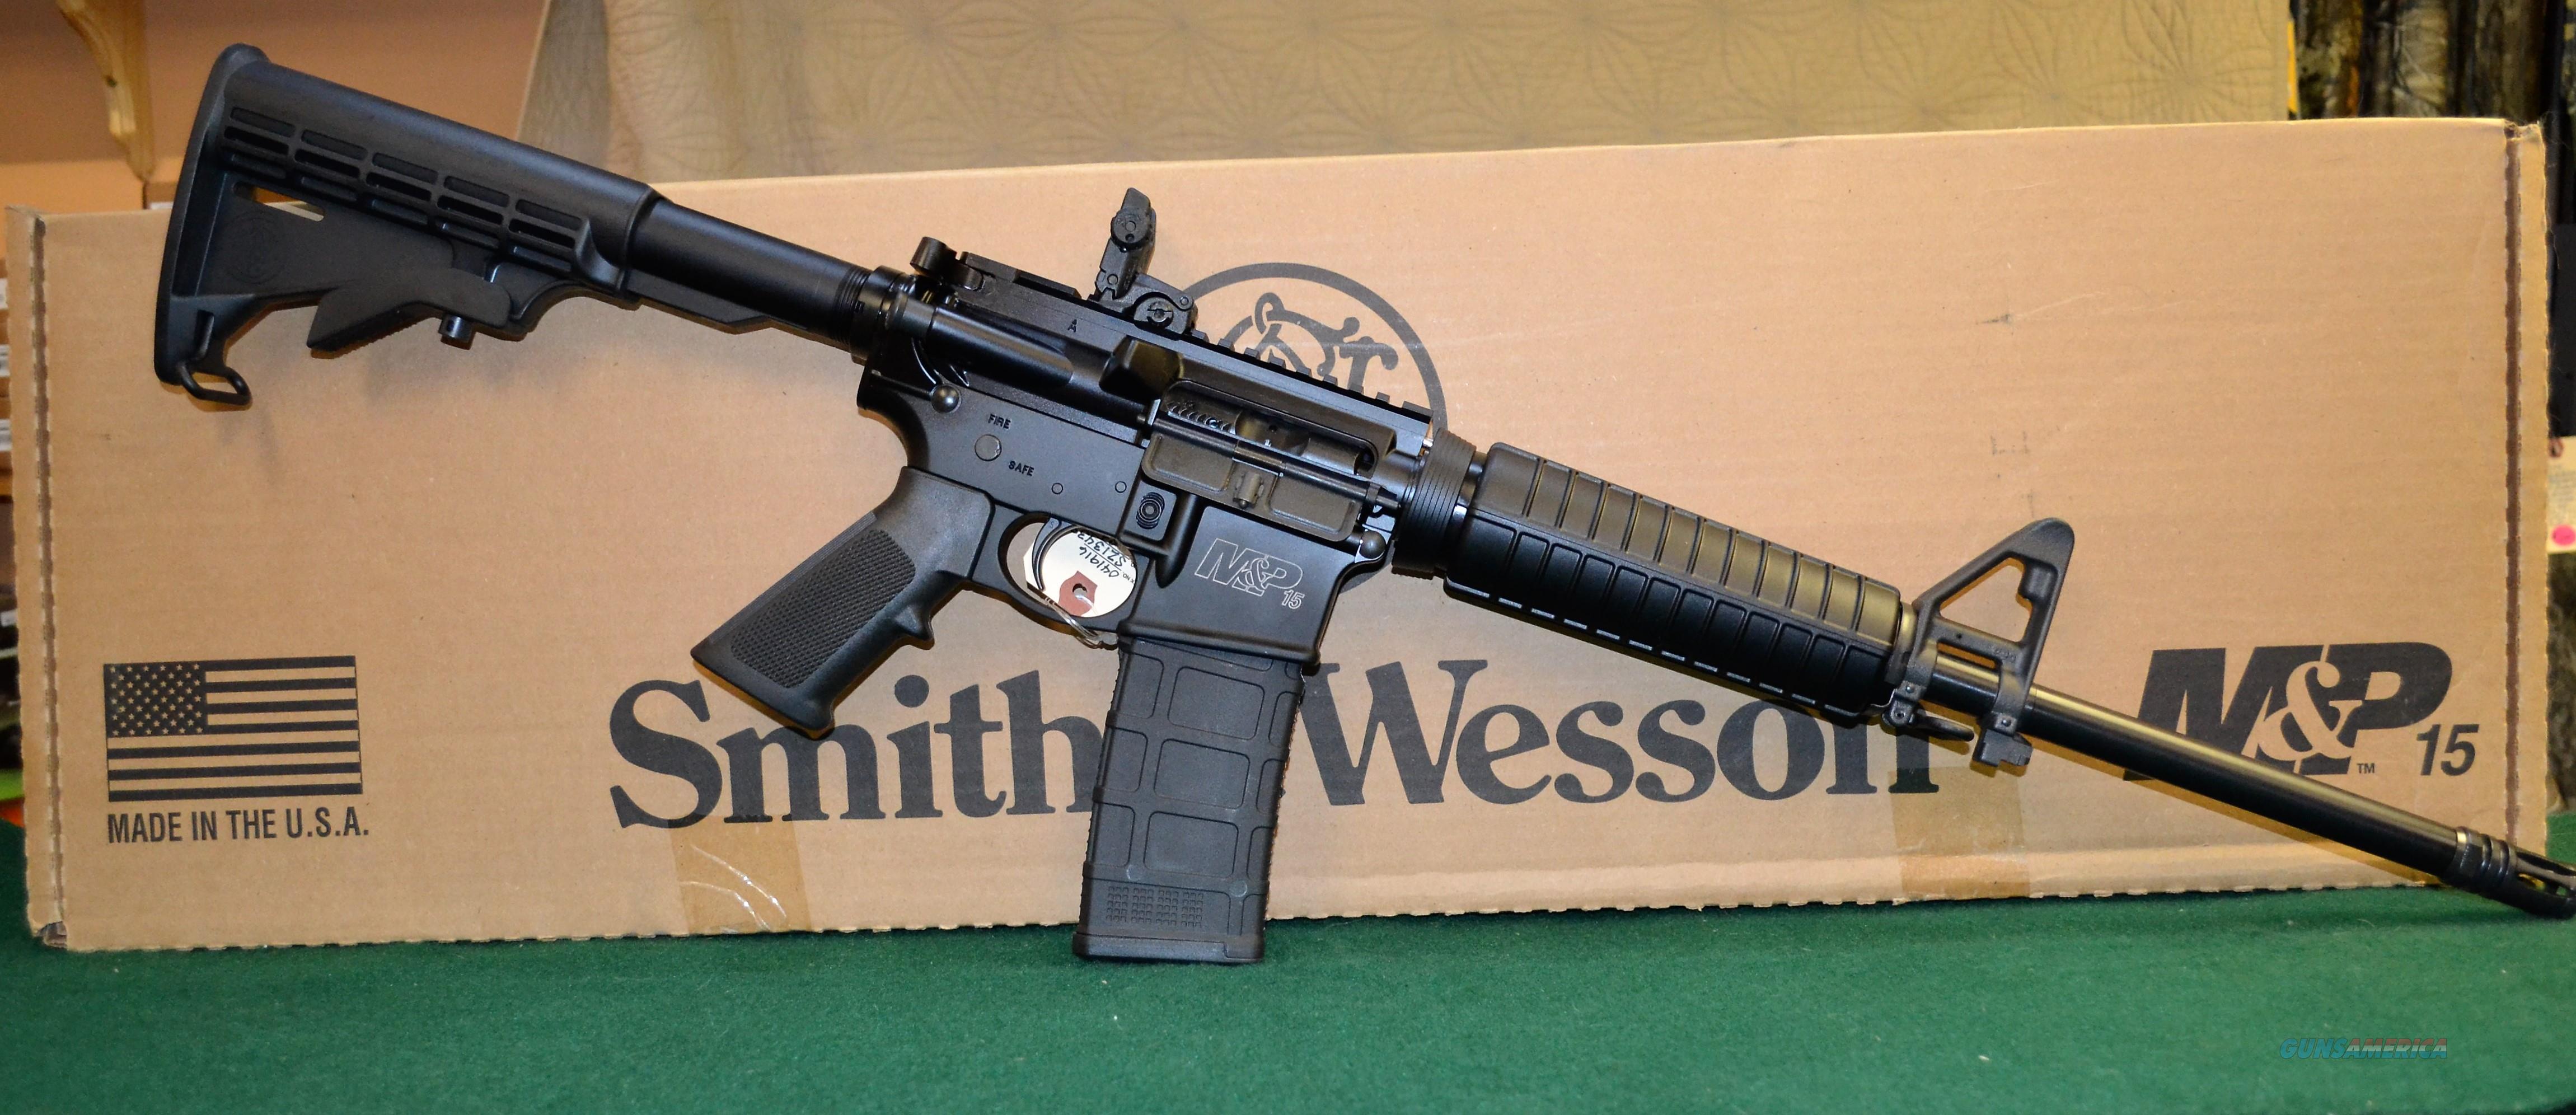 Smith And Wesson Mandp 15 Sport Ii For Sale At 963491453